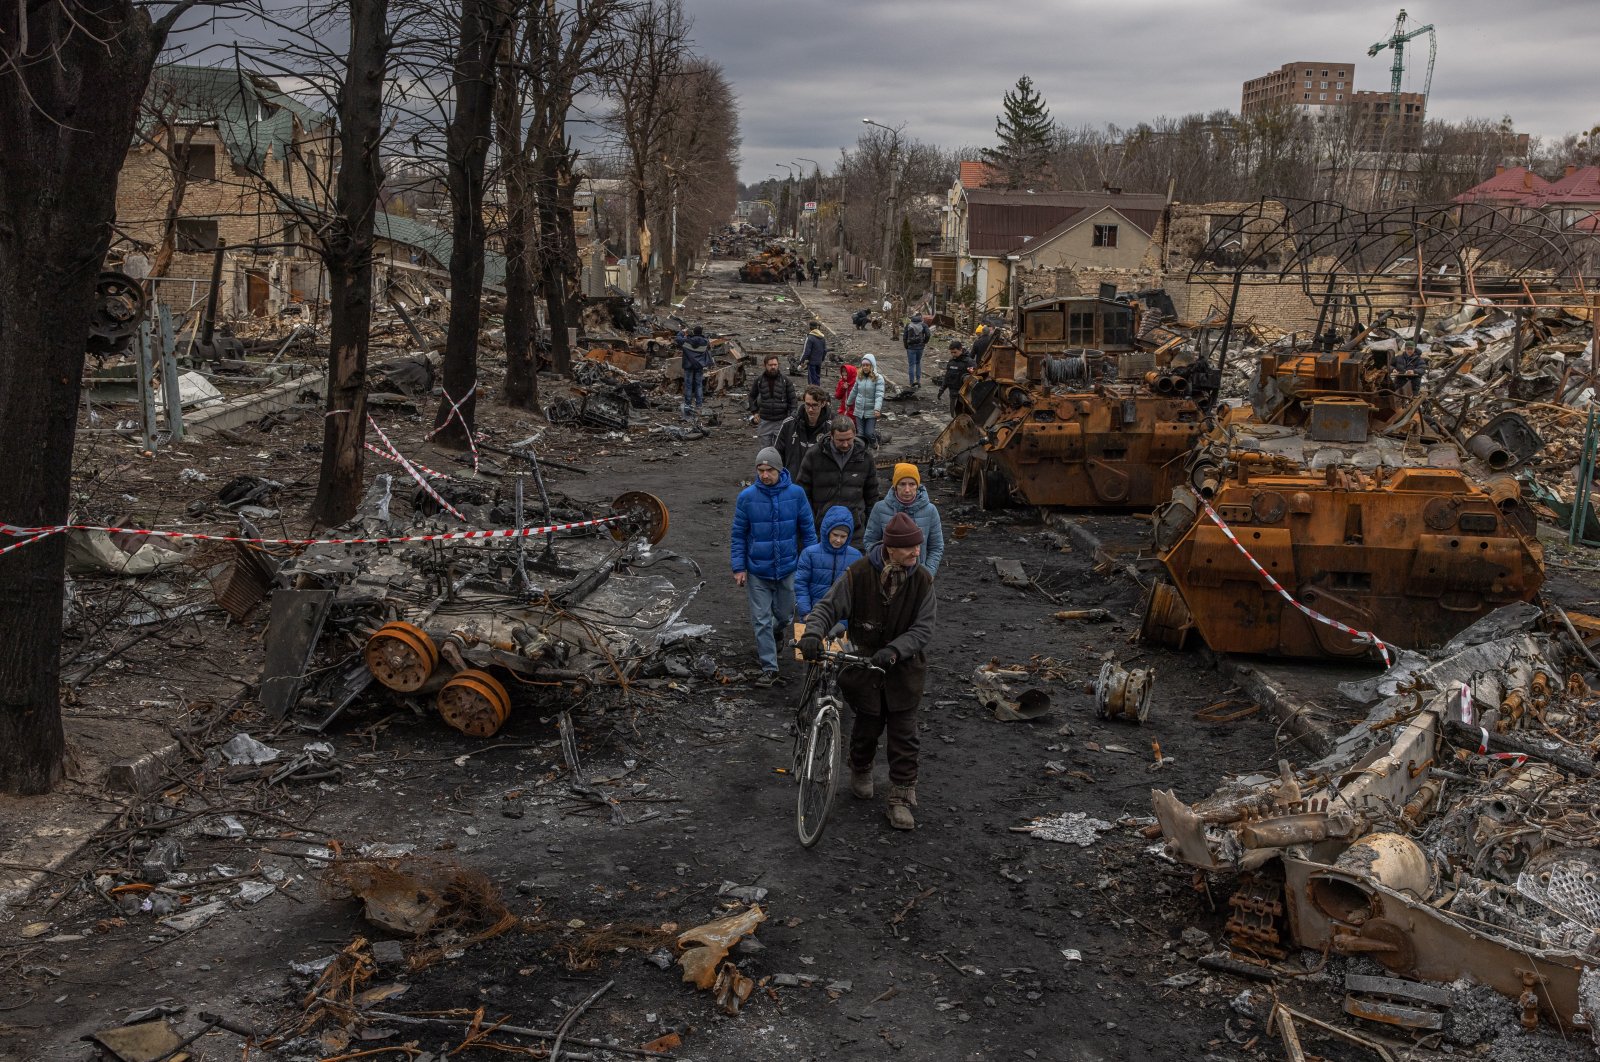 Residents walk past destroyed Russian military machinery on the street in Bucha, the town which was retaken by the Ukrainian army, northwest of Kyiv, Ukraine, April 6, 2022. (EPA Photo)